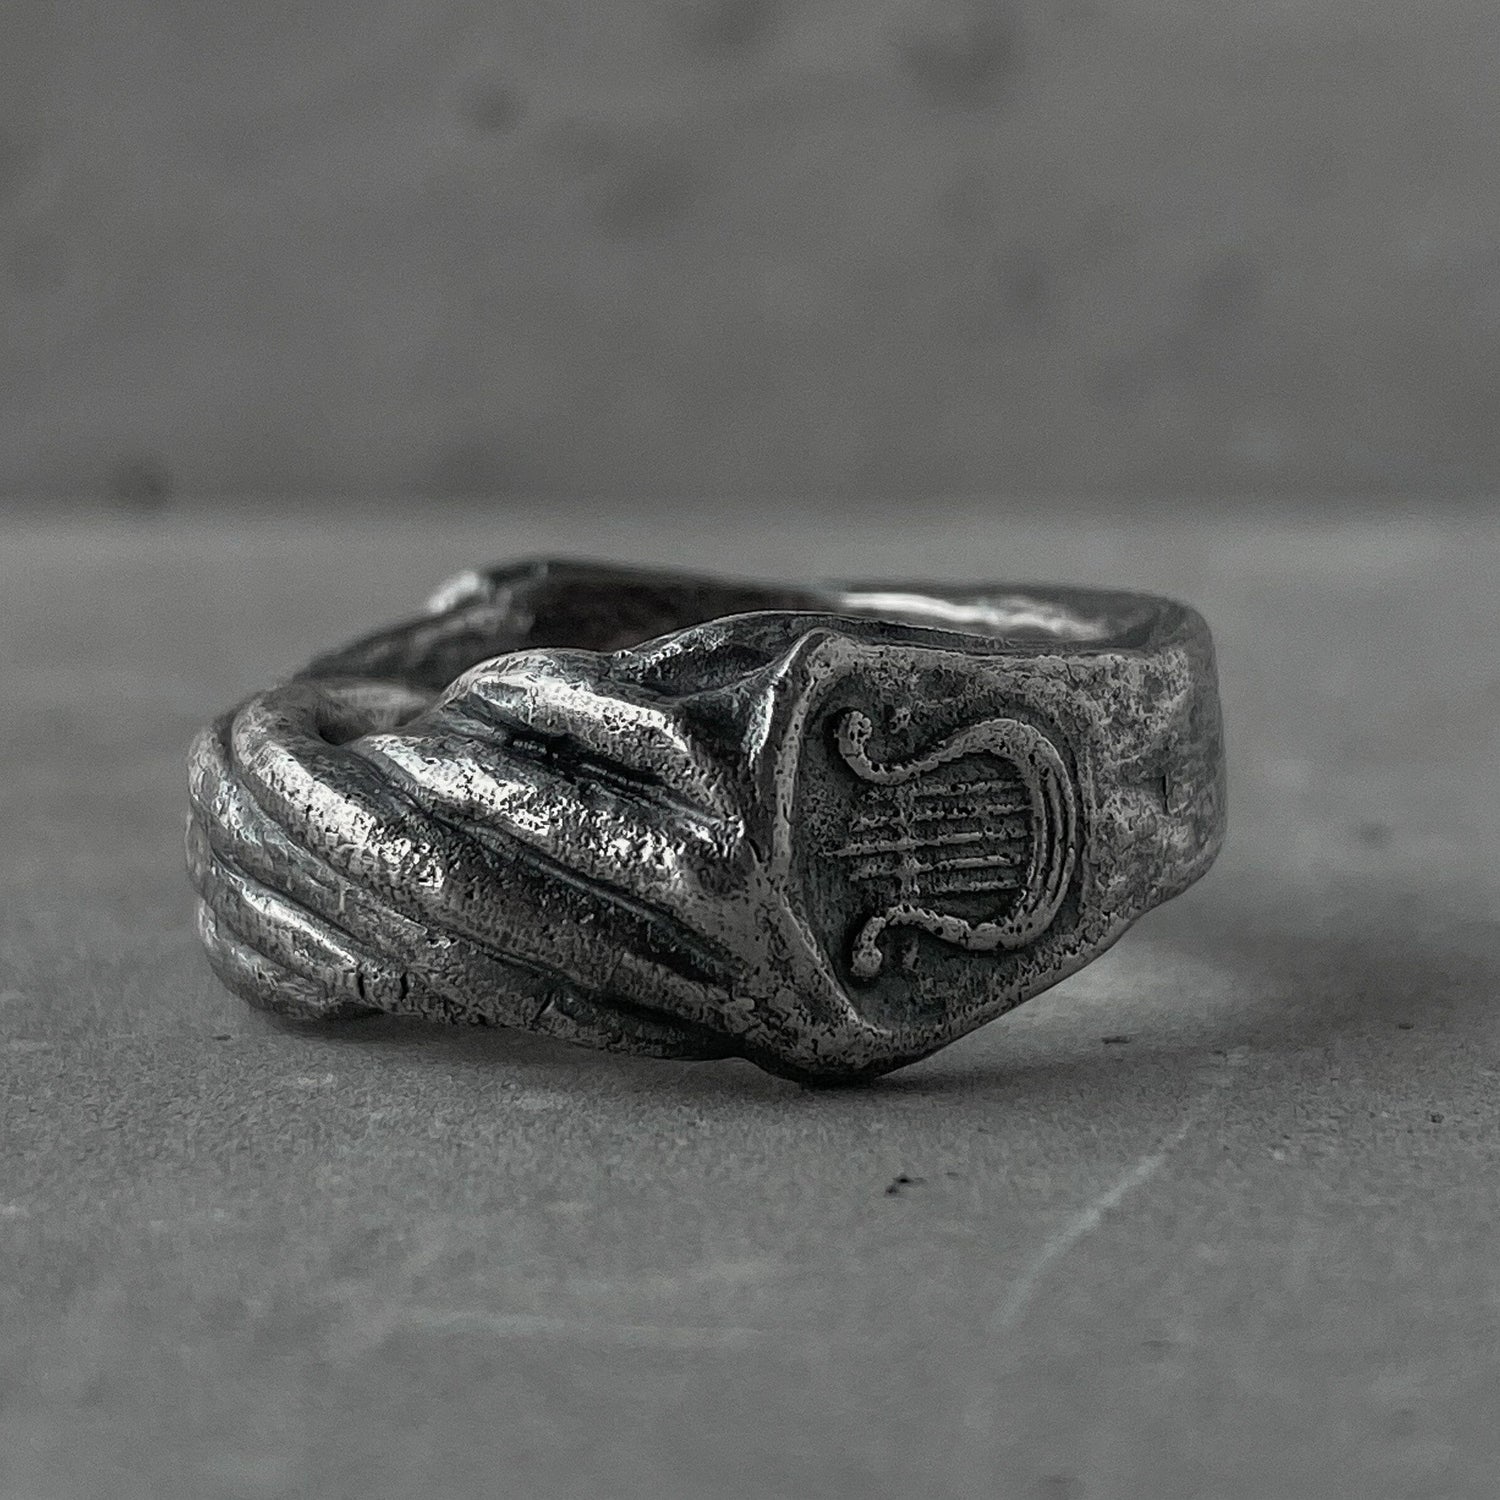 Roman ring- silver ring with antique motifs of unusual shape and harp pattern Unusual rings Project50g 